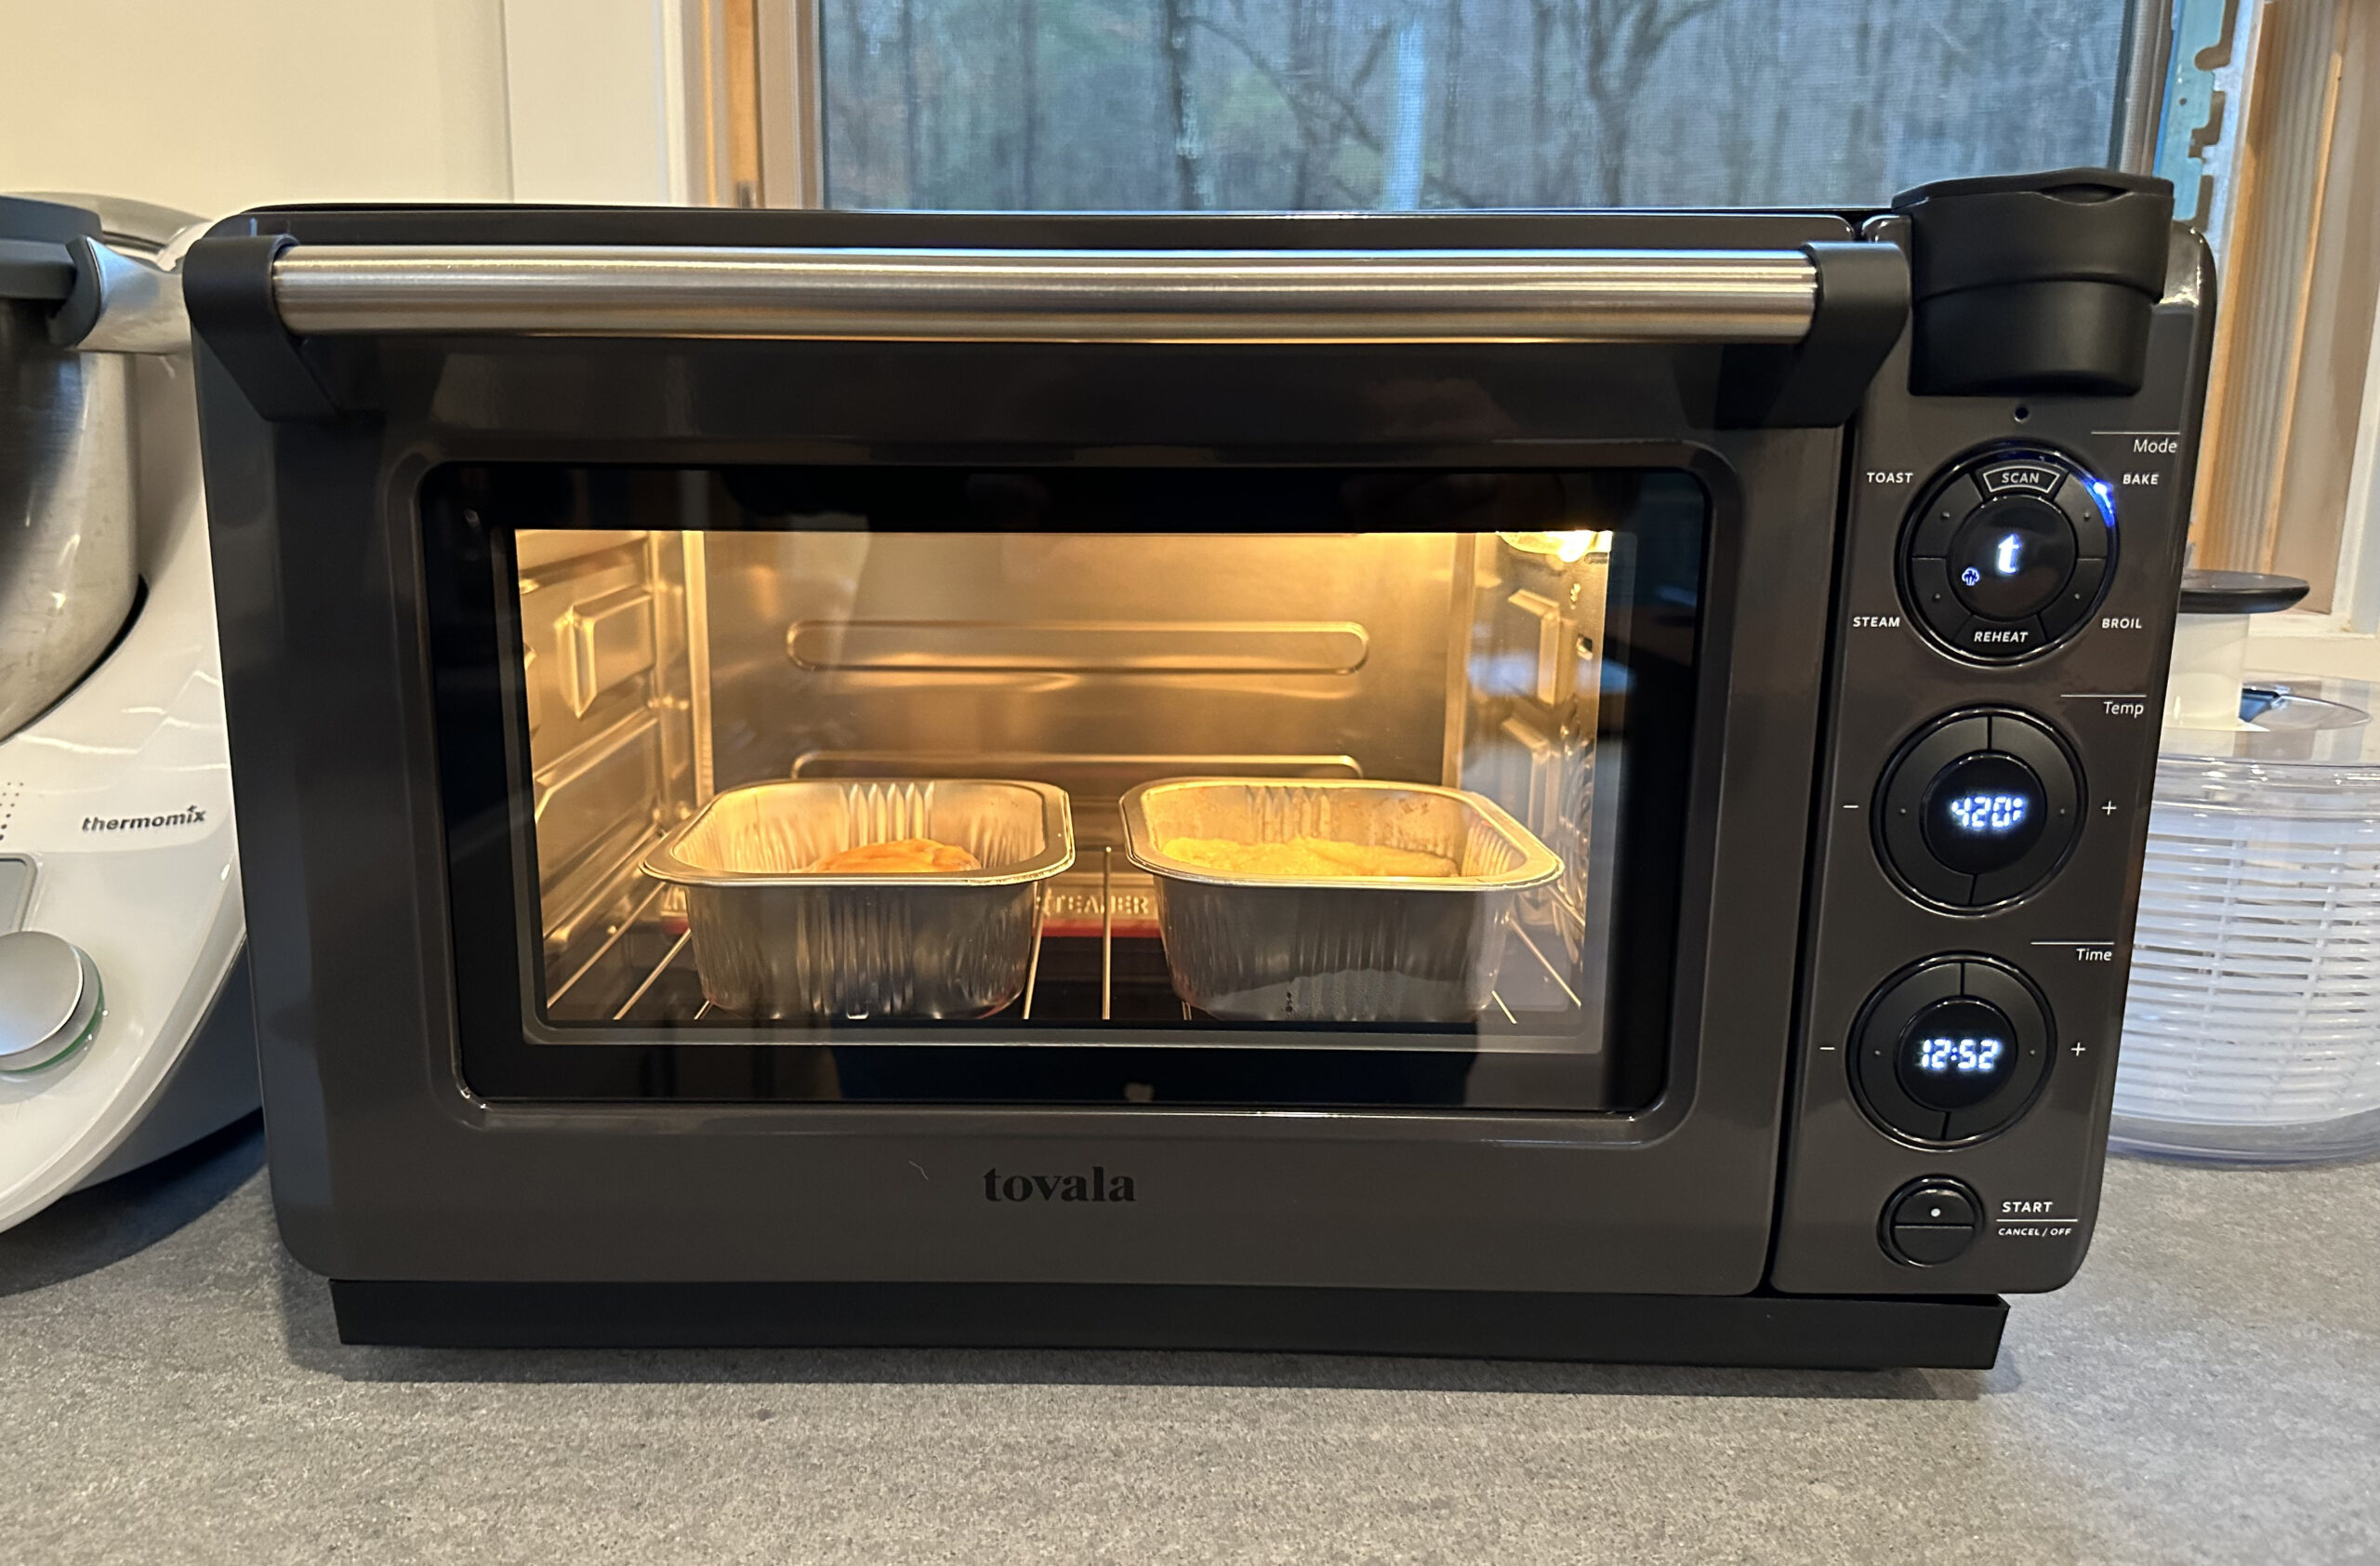 6 Countertop Smart Ovens That Will Change the Way You Cook - Remodelista